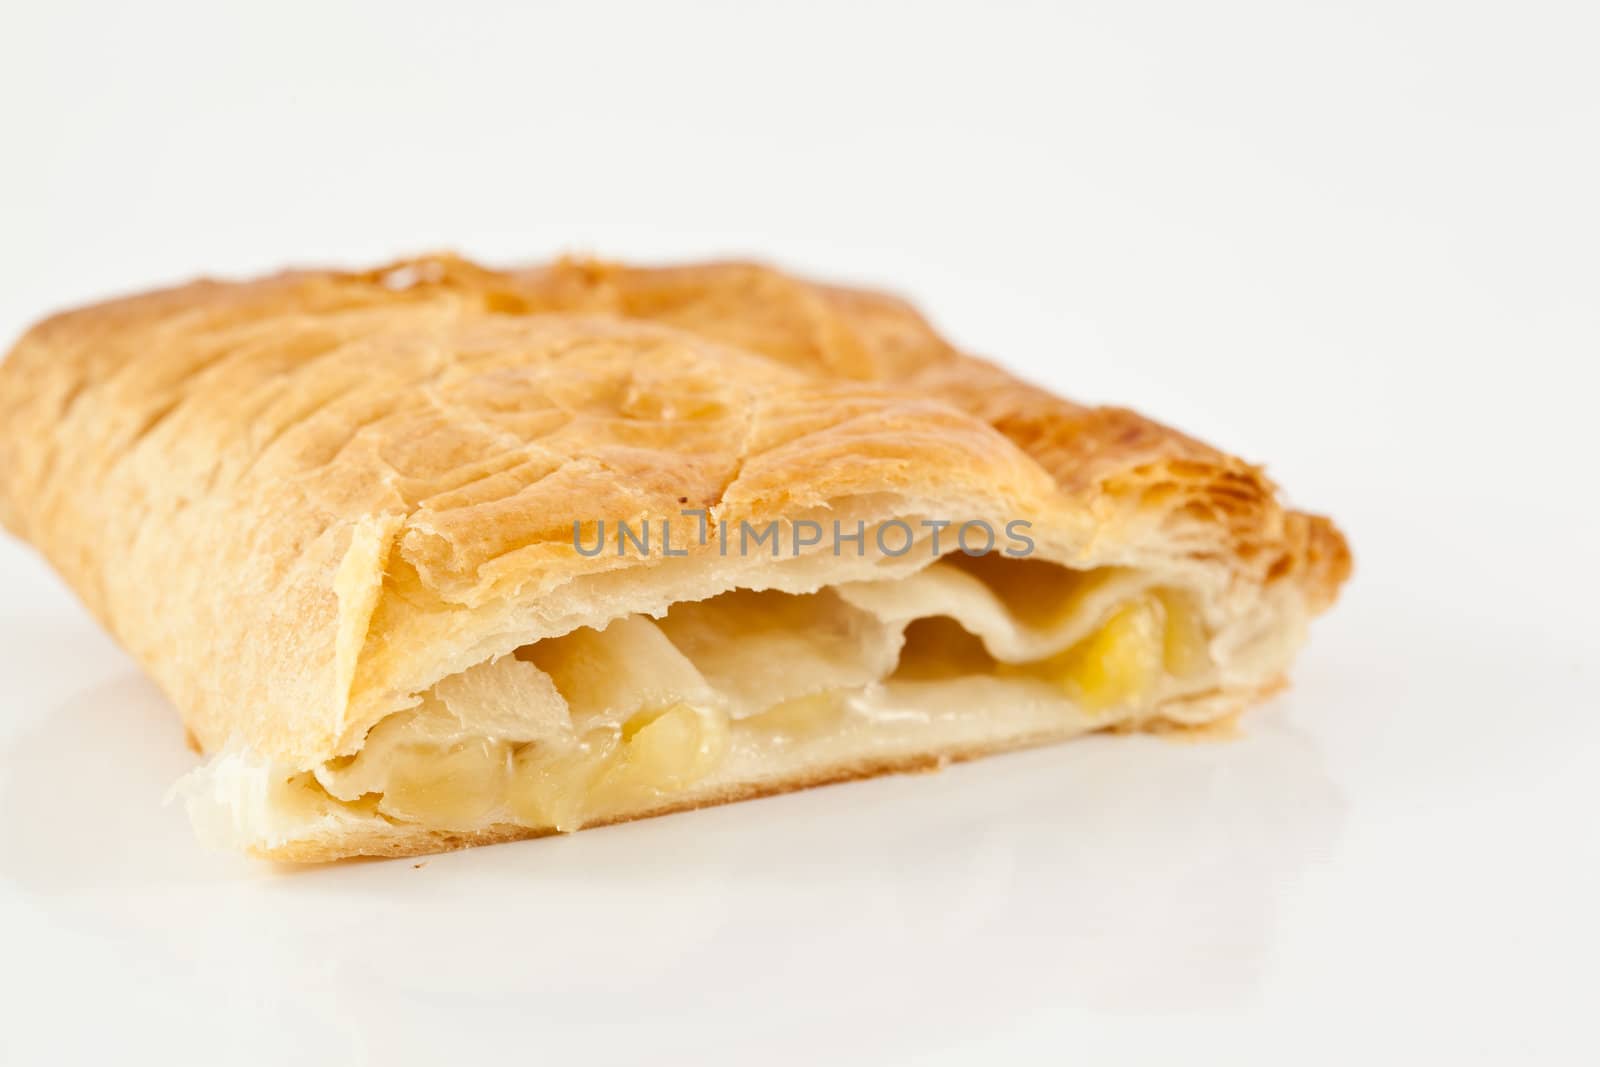 Pineapple pie isolated on white background